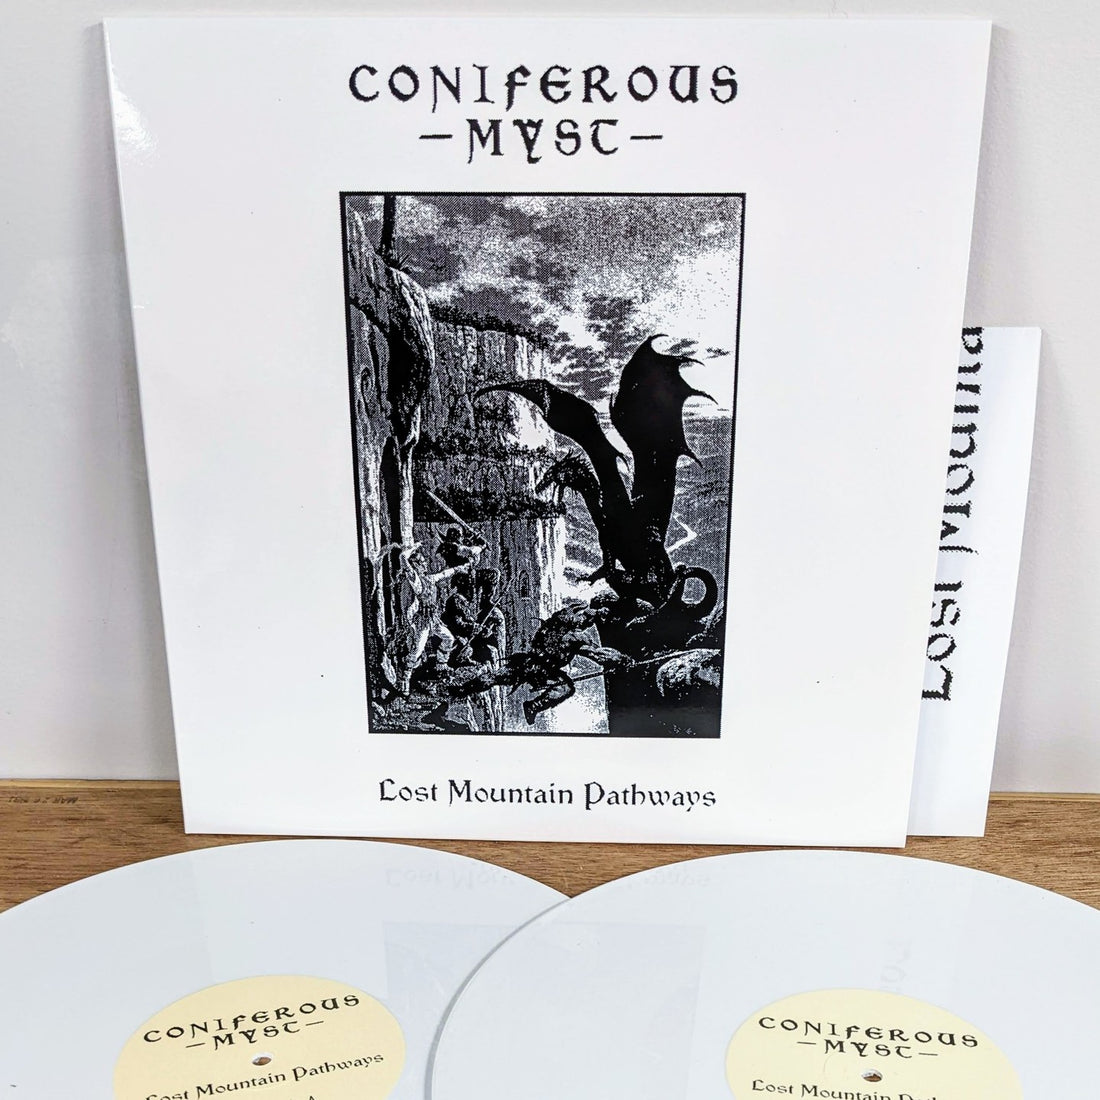 Now Available. Just landed; the long delayed CONIFEROUS MYST vinyl